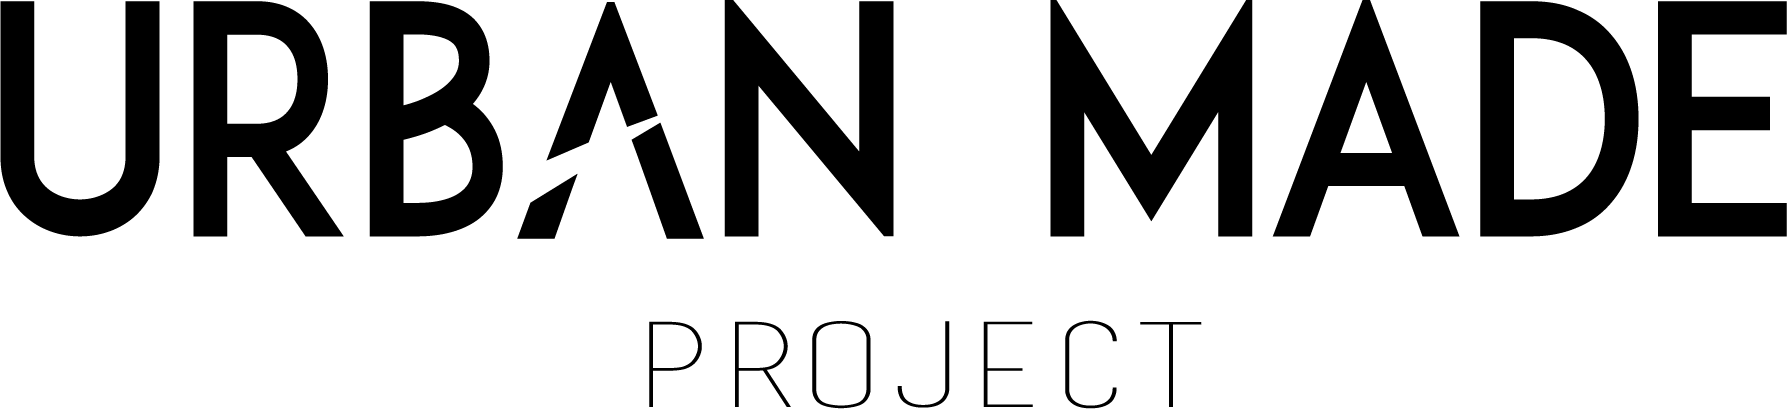 Urban Made Project